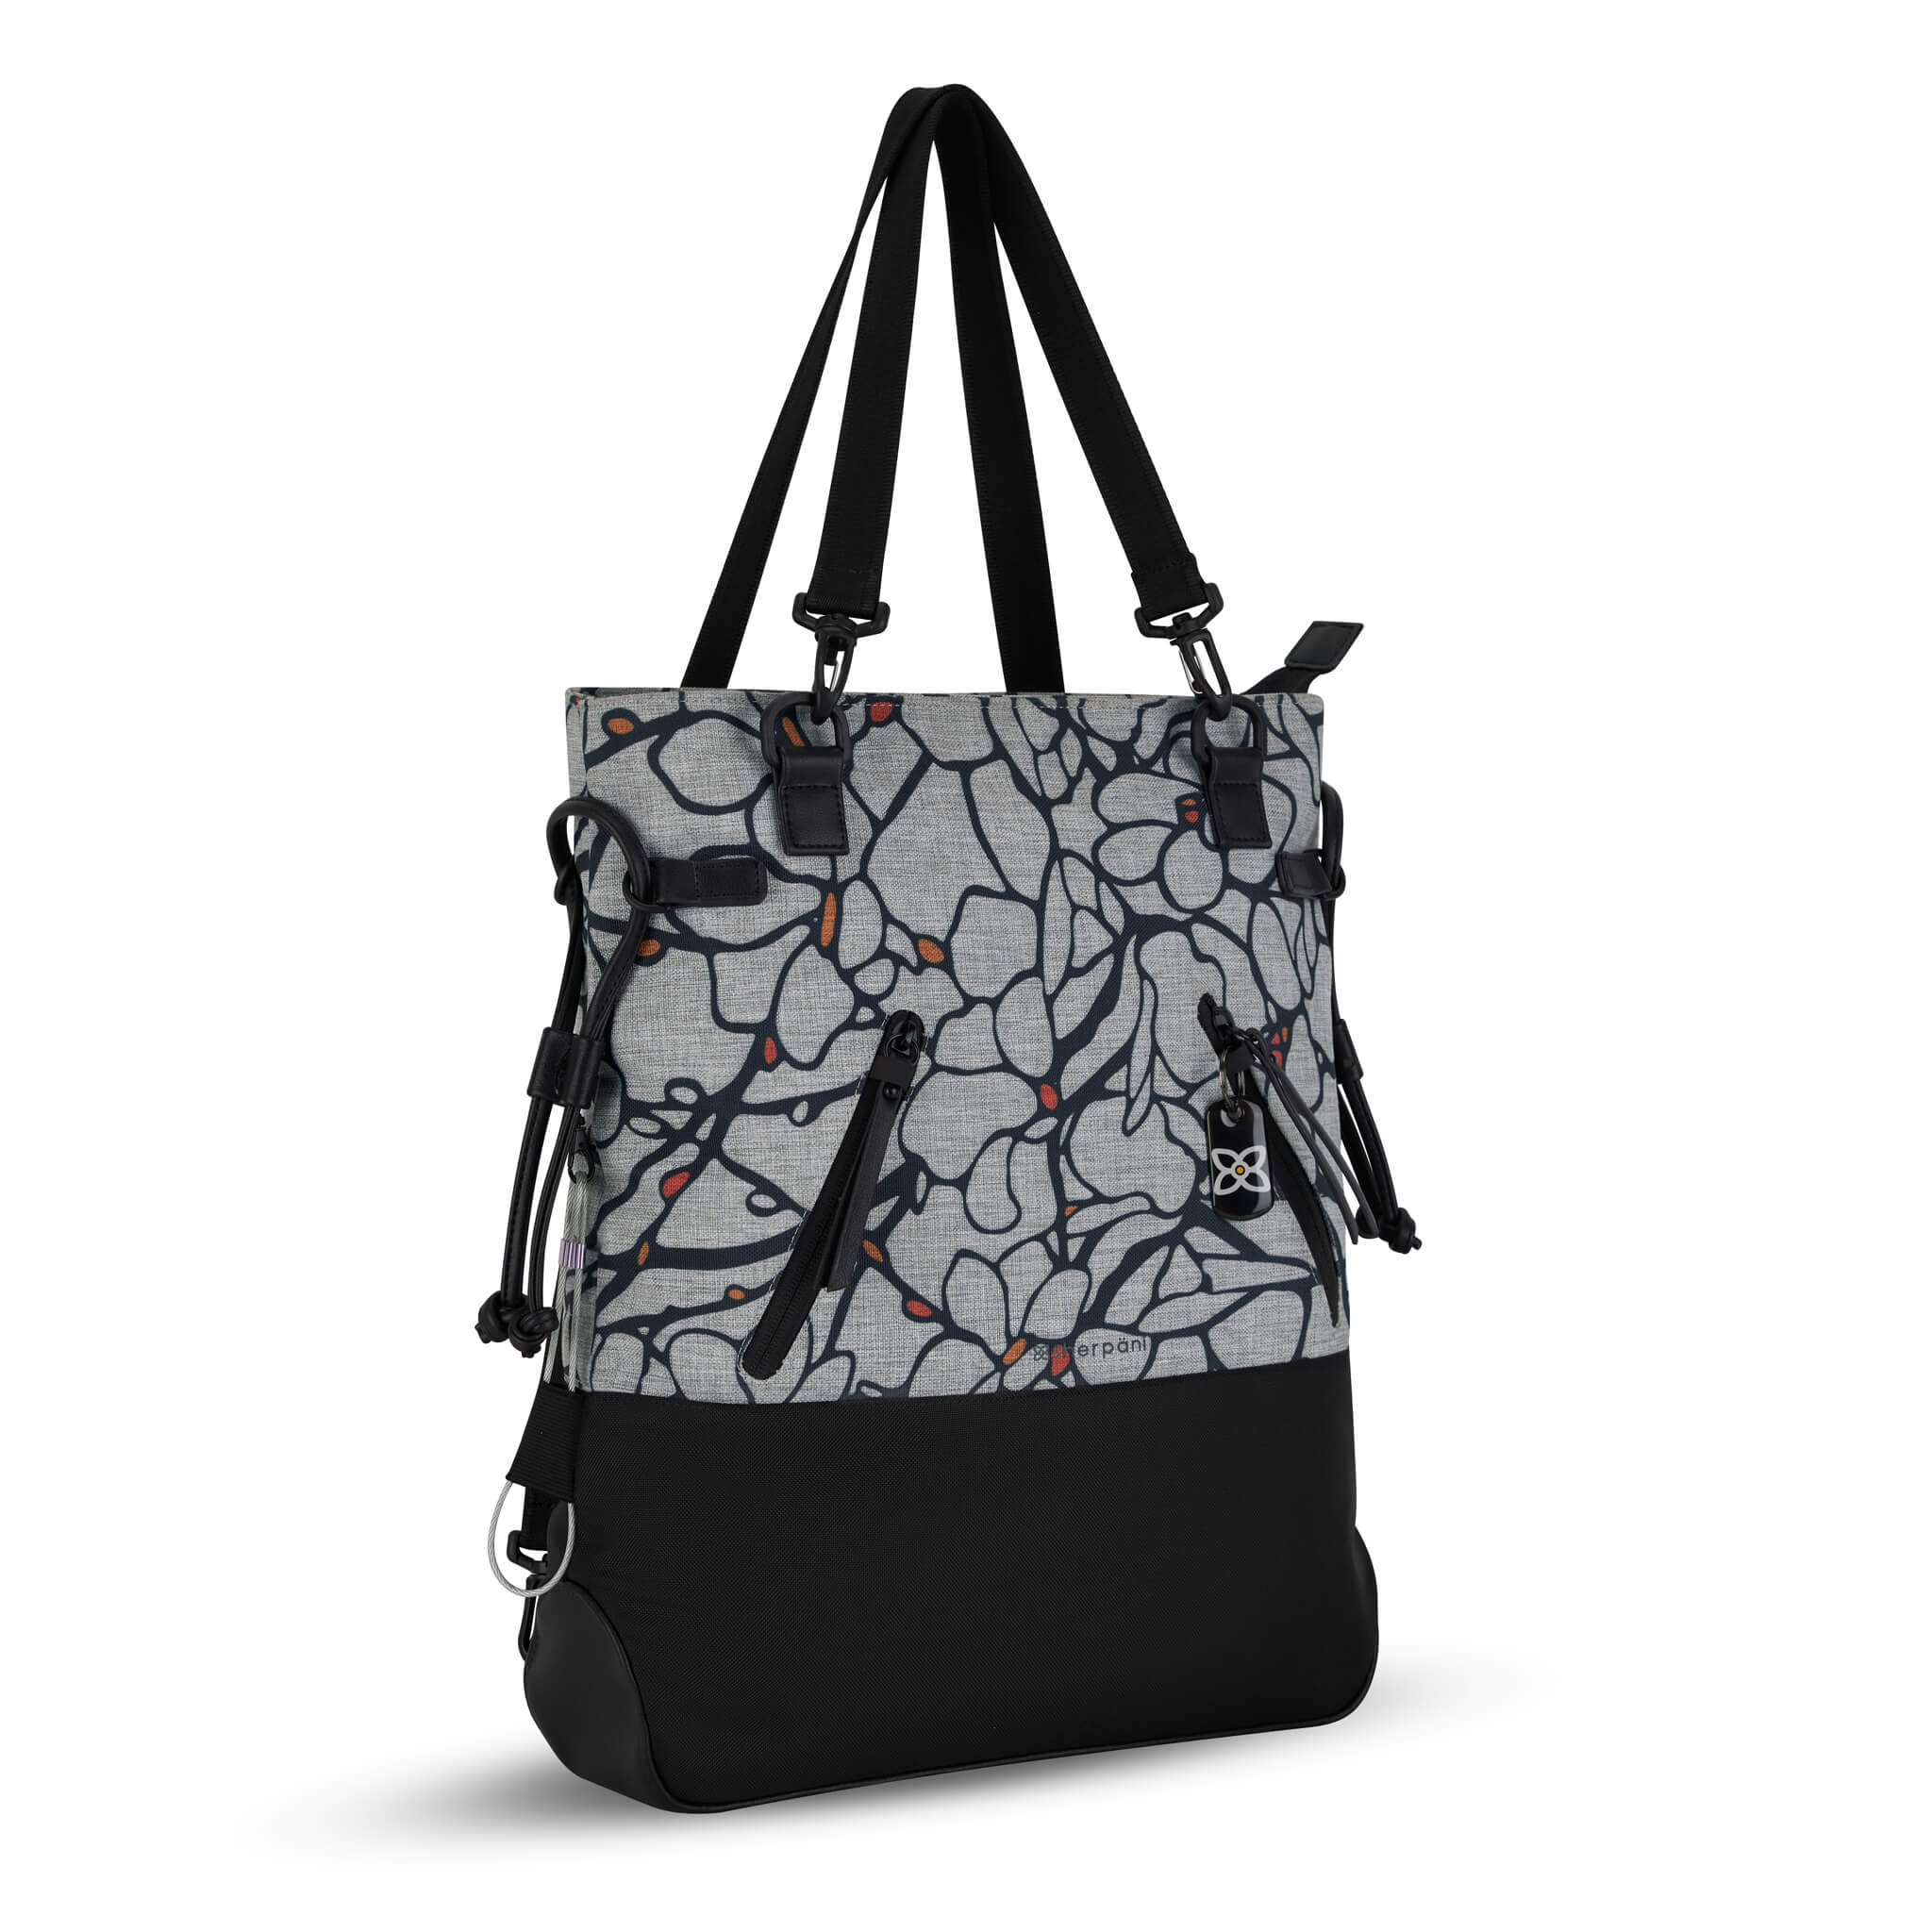 Angled front view of the Sherpani Anti-Theft tote backpack, the Tempest in Sakura. The convertible bag includes RFID protection, locking zipper pockets, adjustable straps, and a trolley sleeve. 